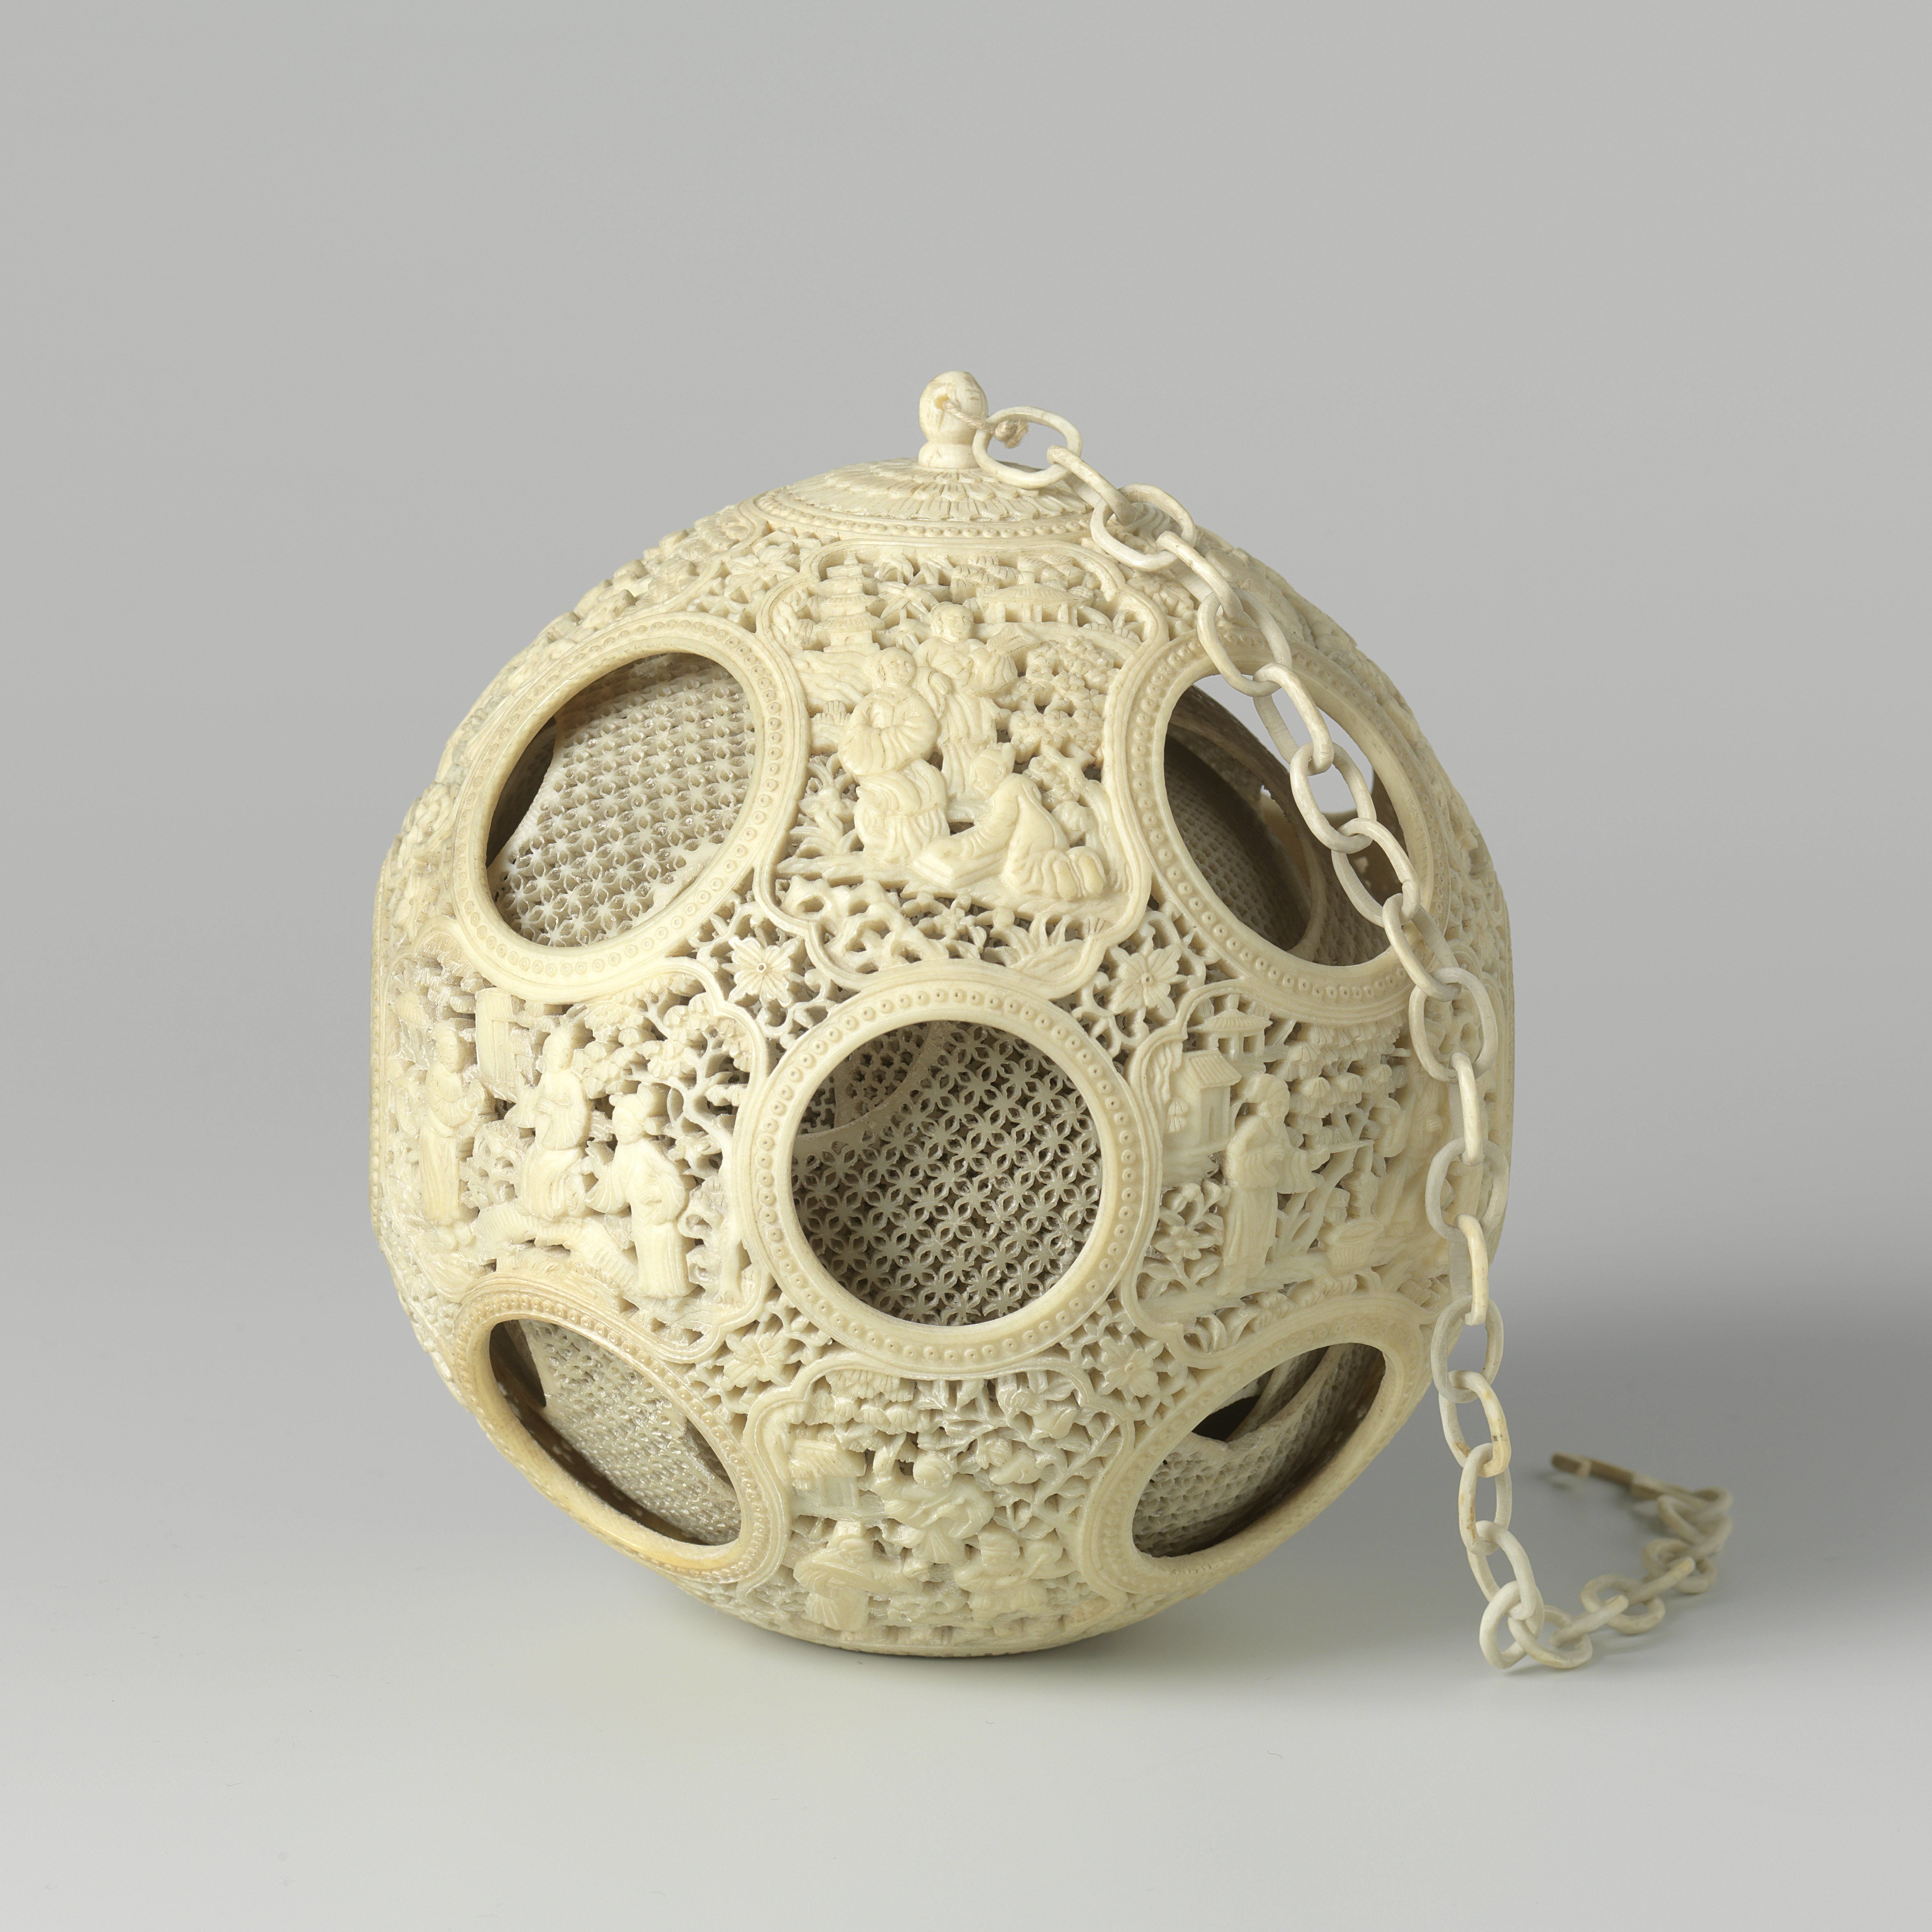 A 19th-century puzzle ball.